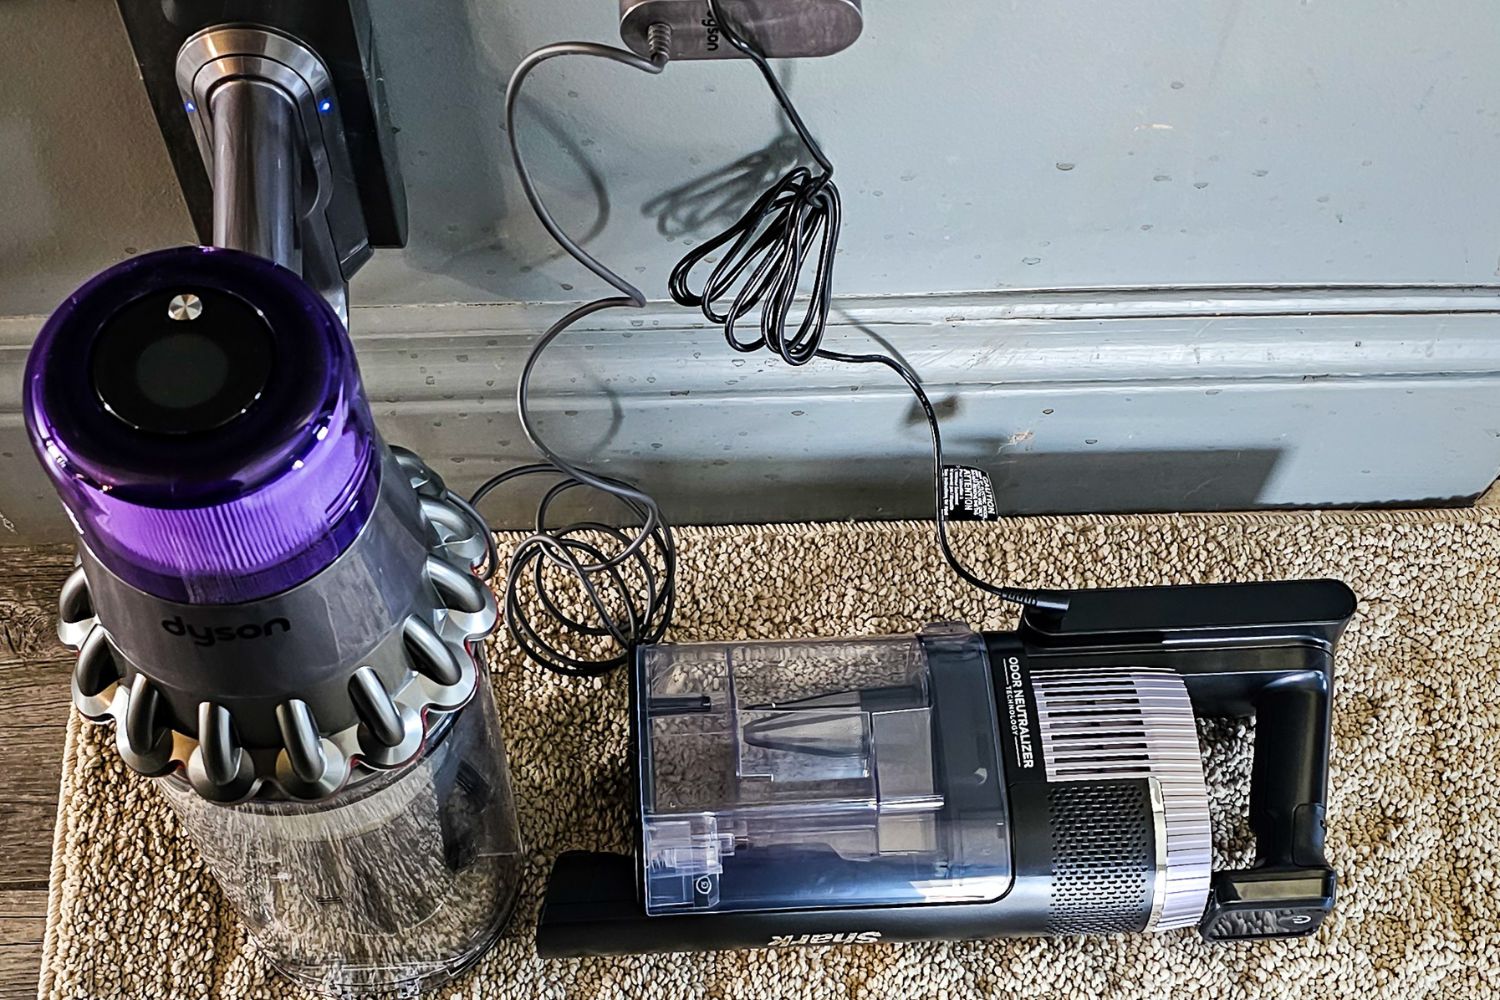 Dyson vs Shark cordless vacuum batteries plugged into a wall outlet to charge during testing.